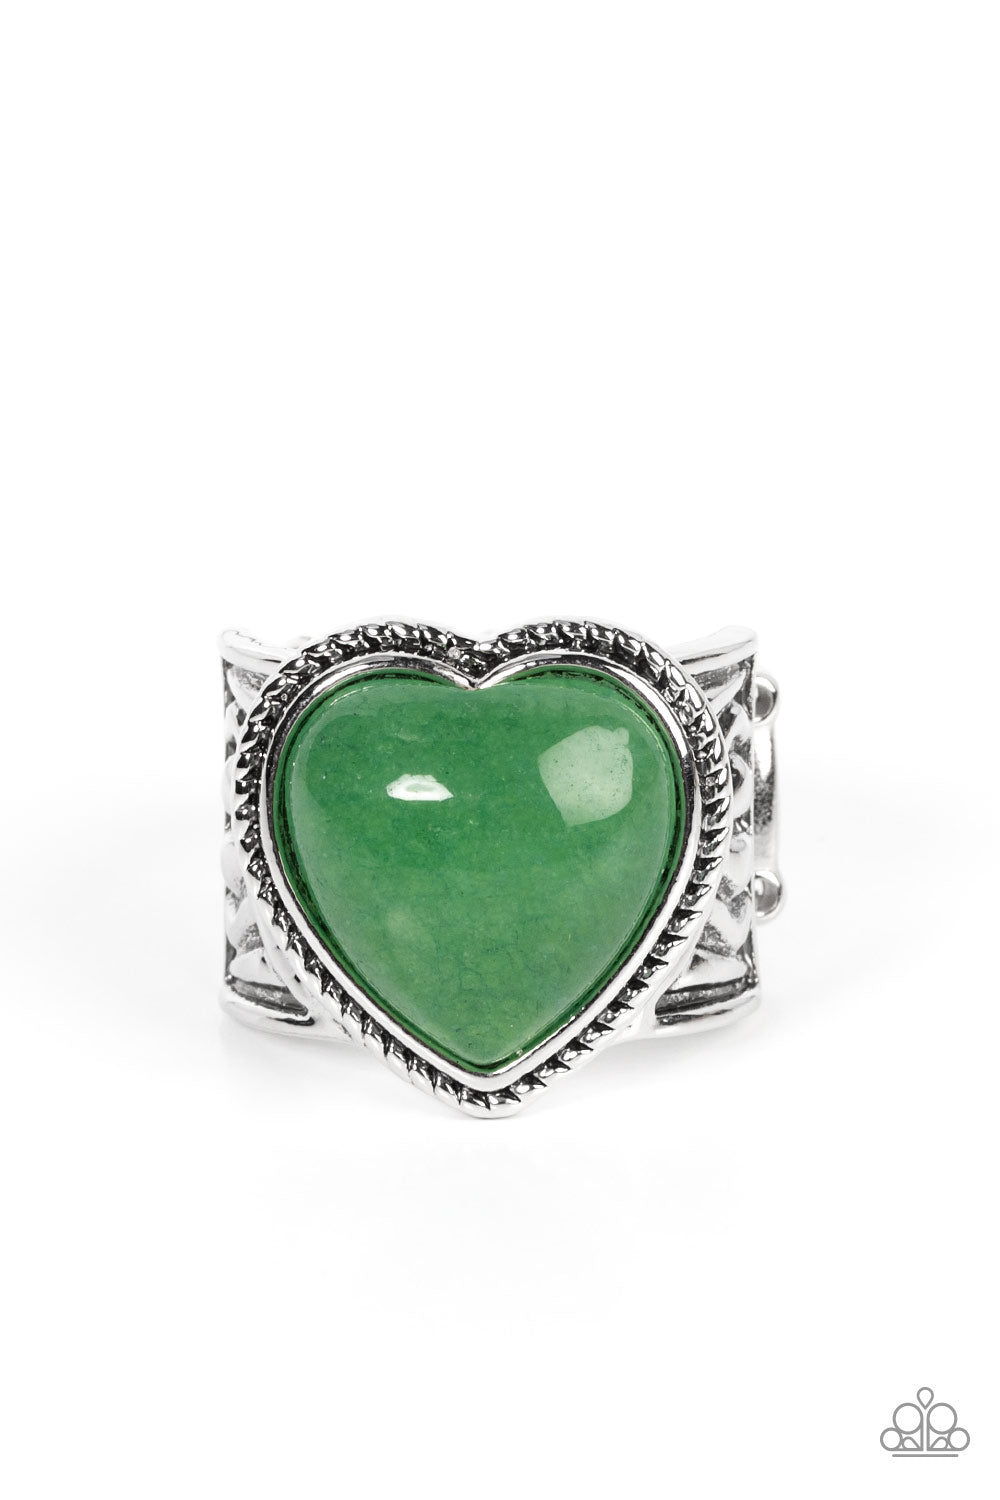 Stone Age Admirer Green Ring